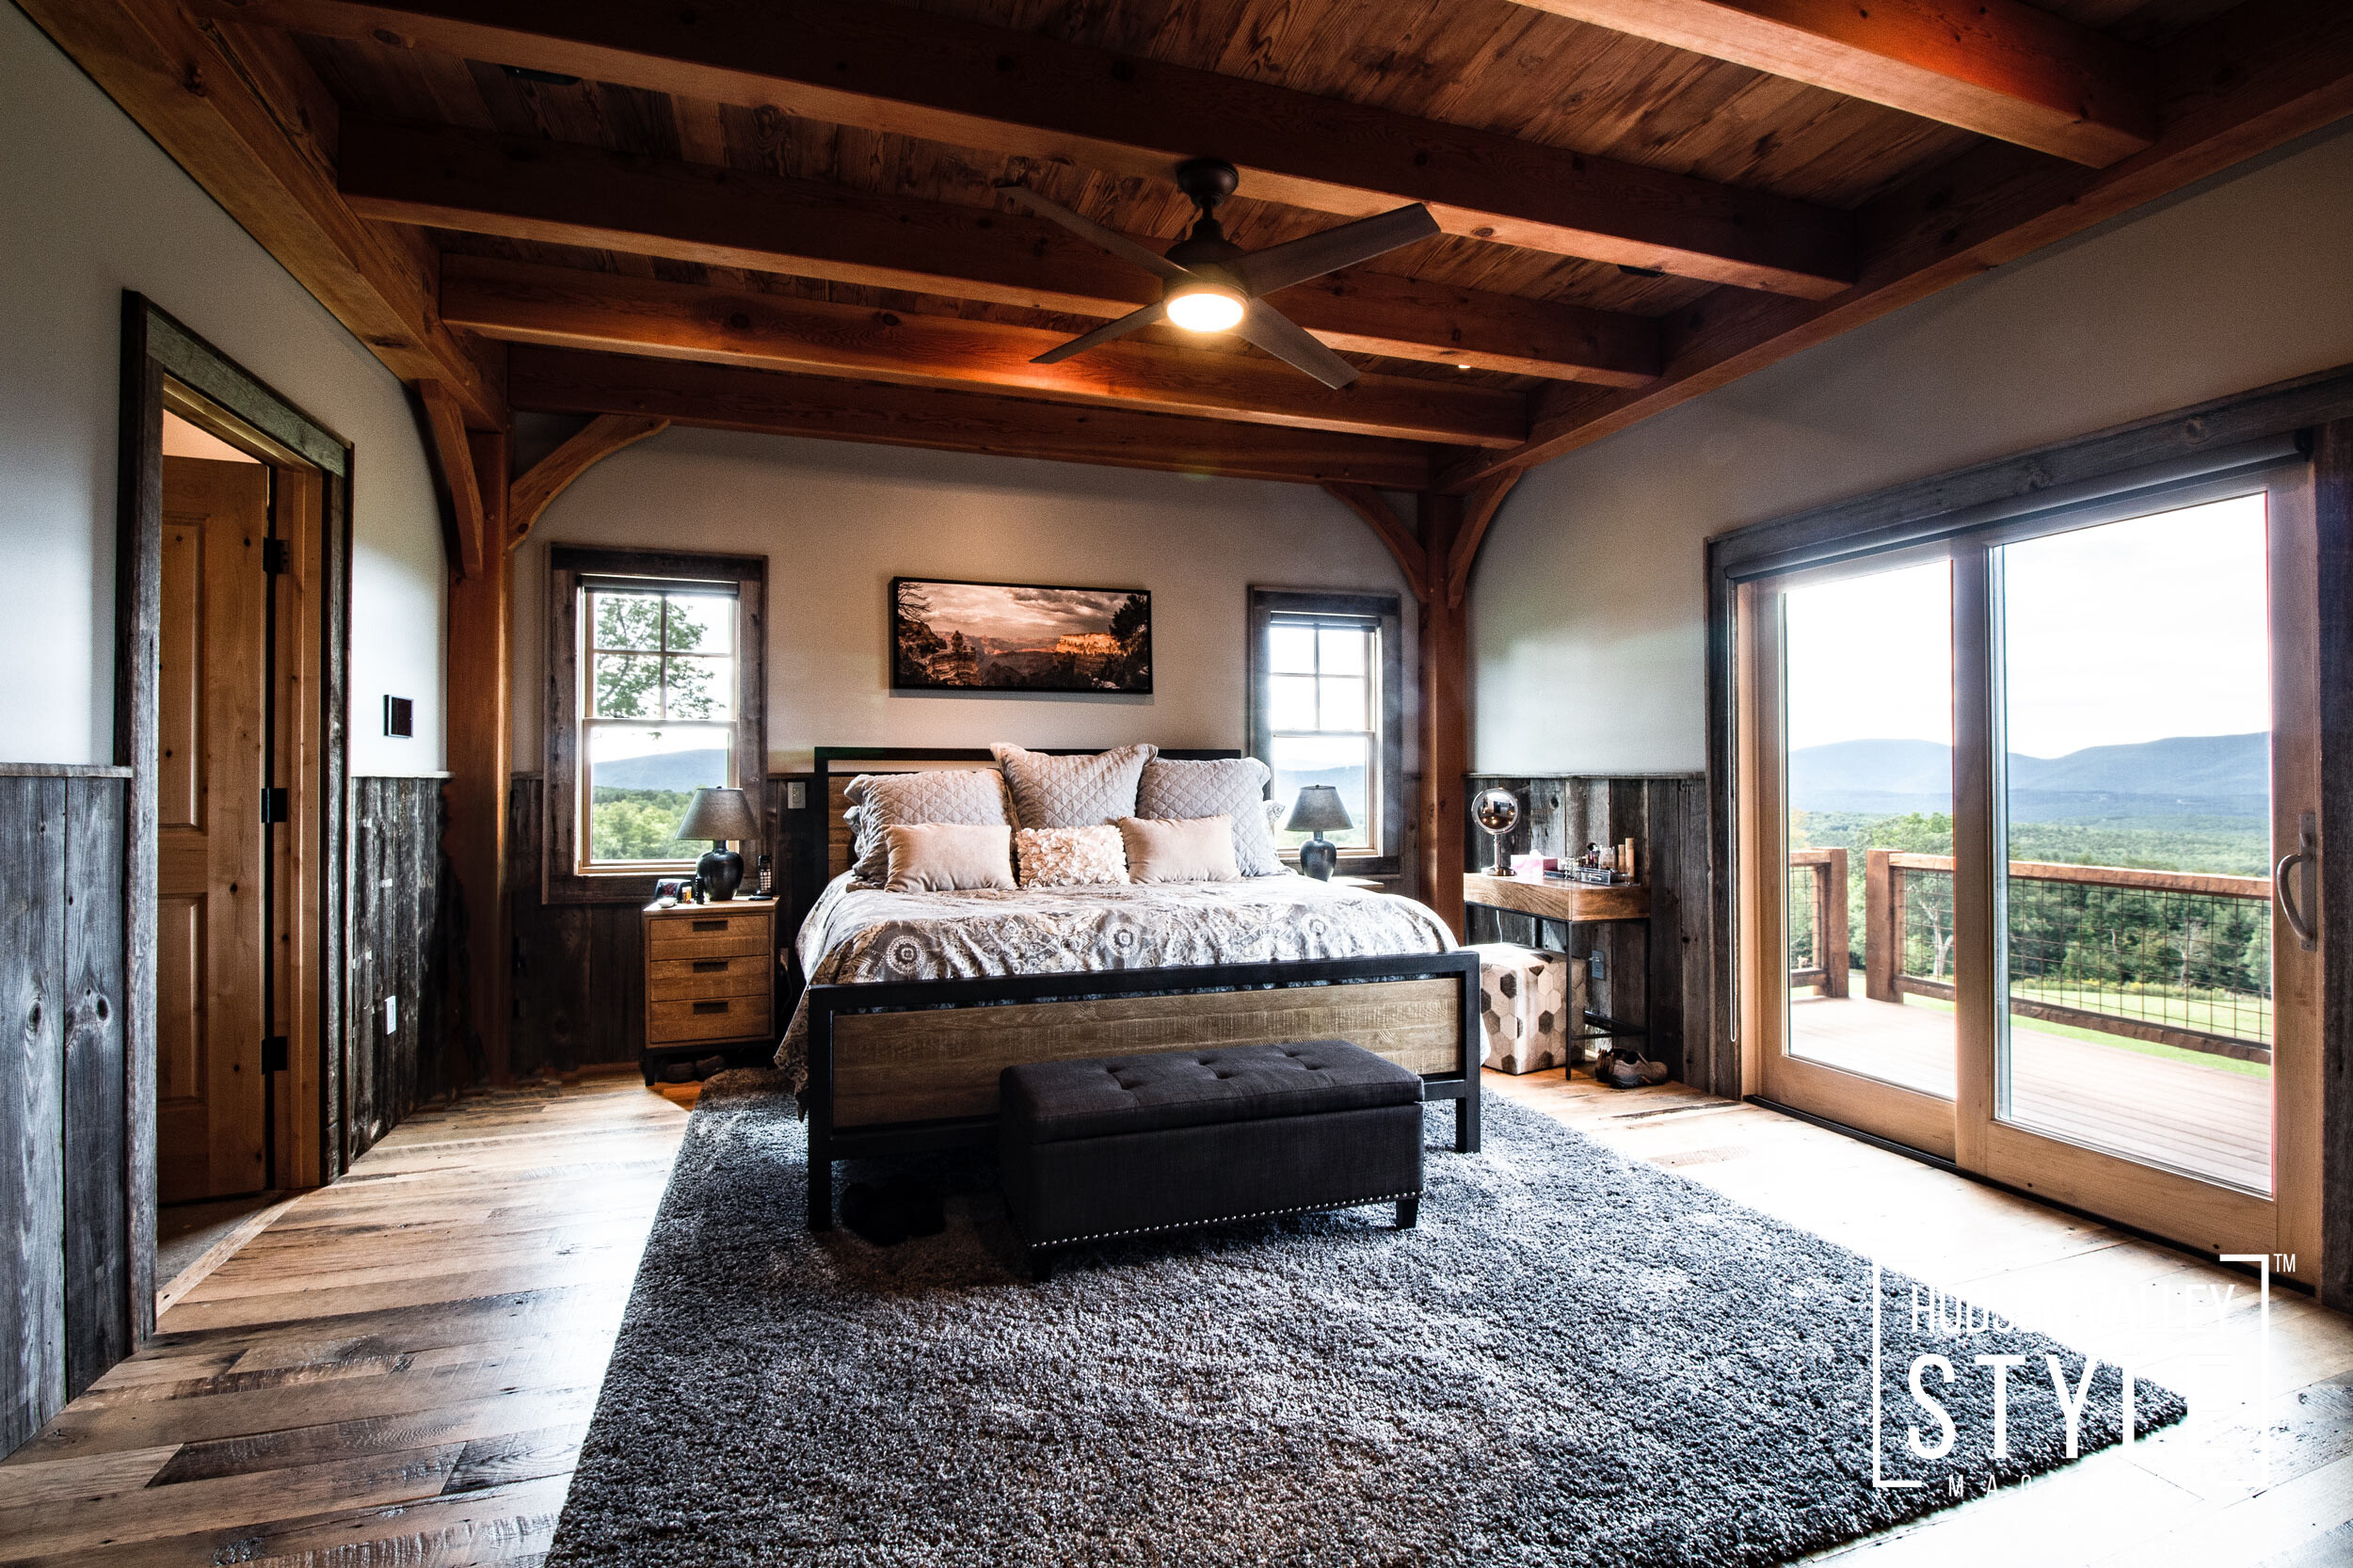 Choosing Home Decor for Your Hudson Valley Lodge or Cabin With a Rustic Theme